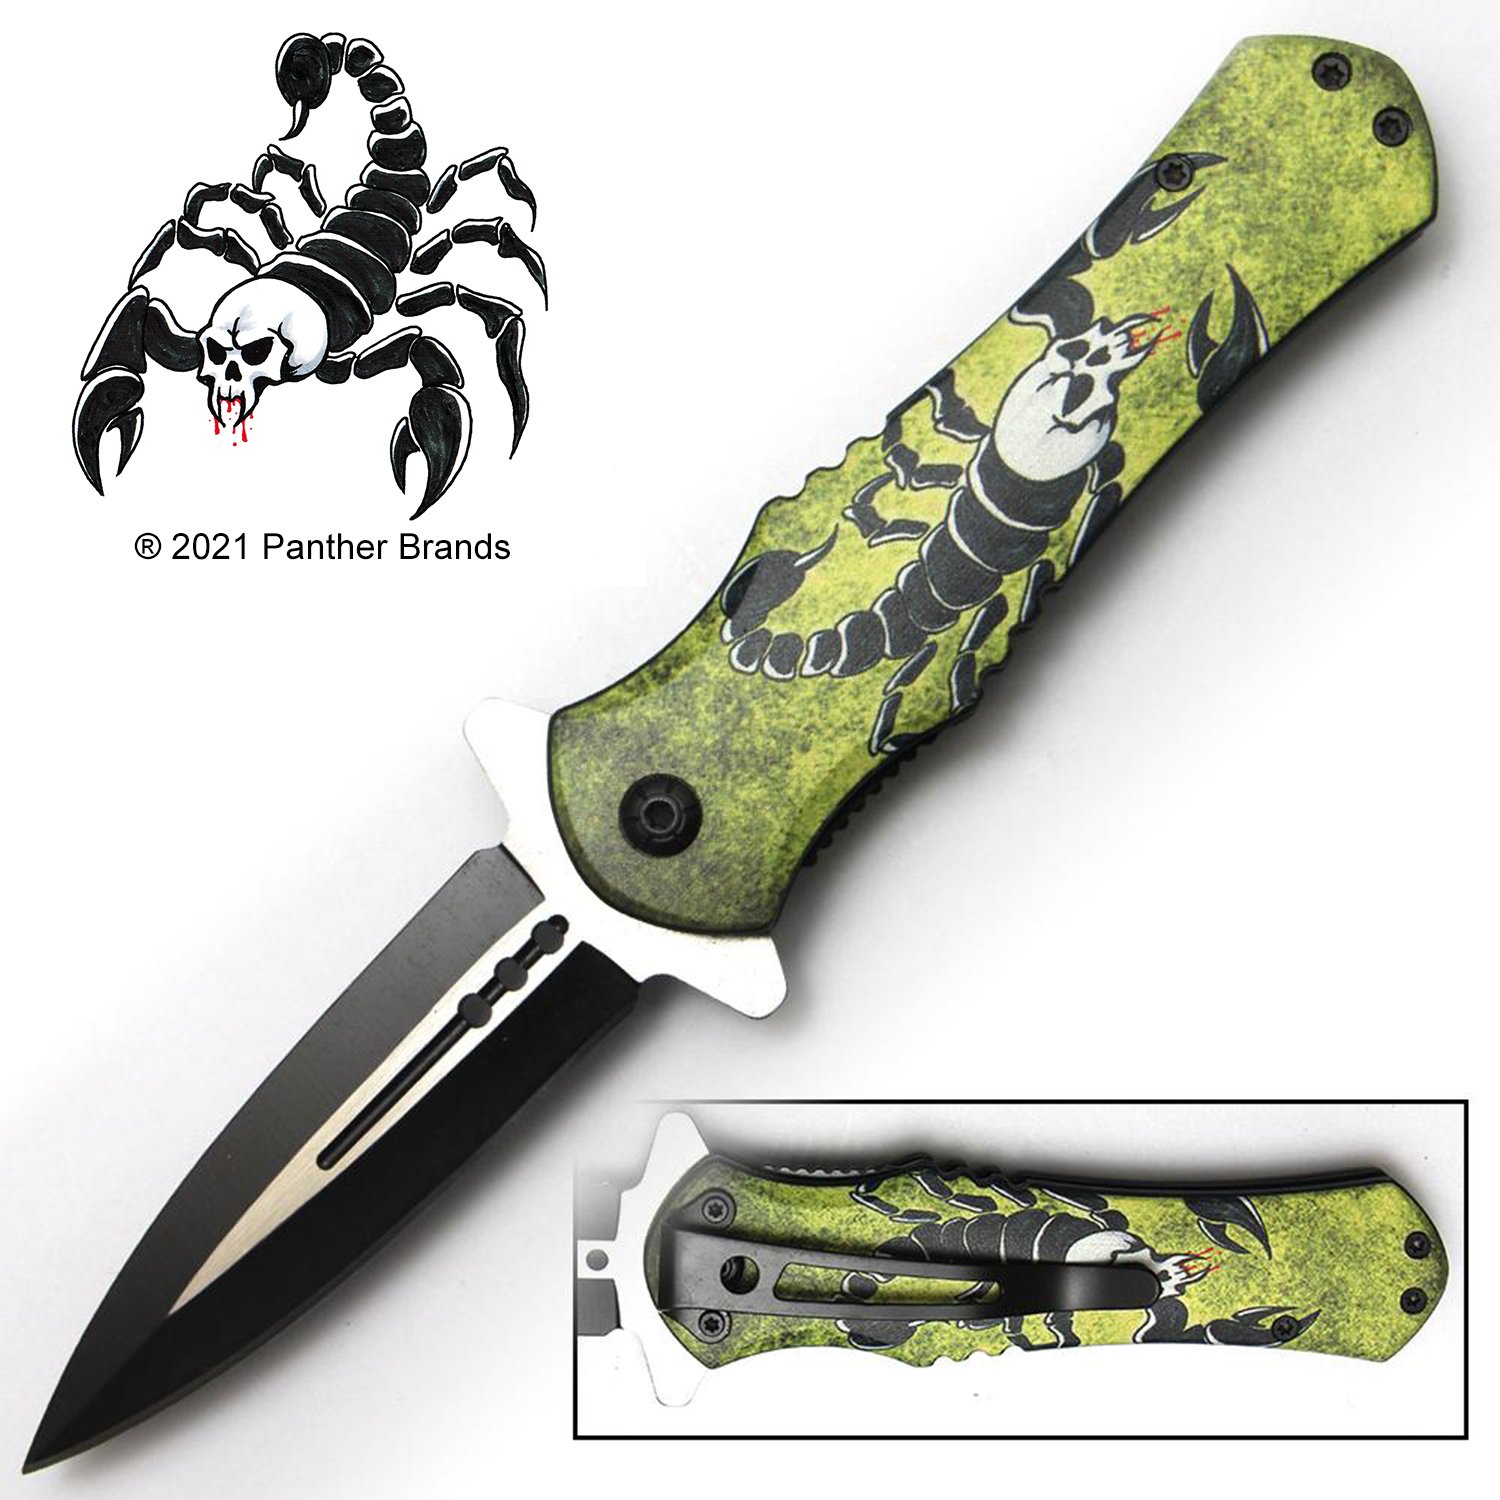 Tiger USA Spring Assisted Knife   Neon Yellow Scorpion